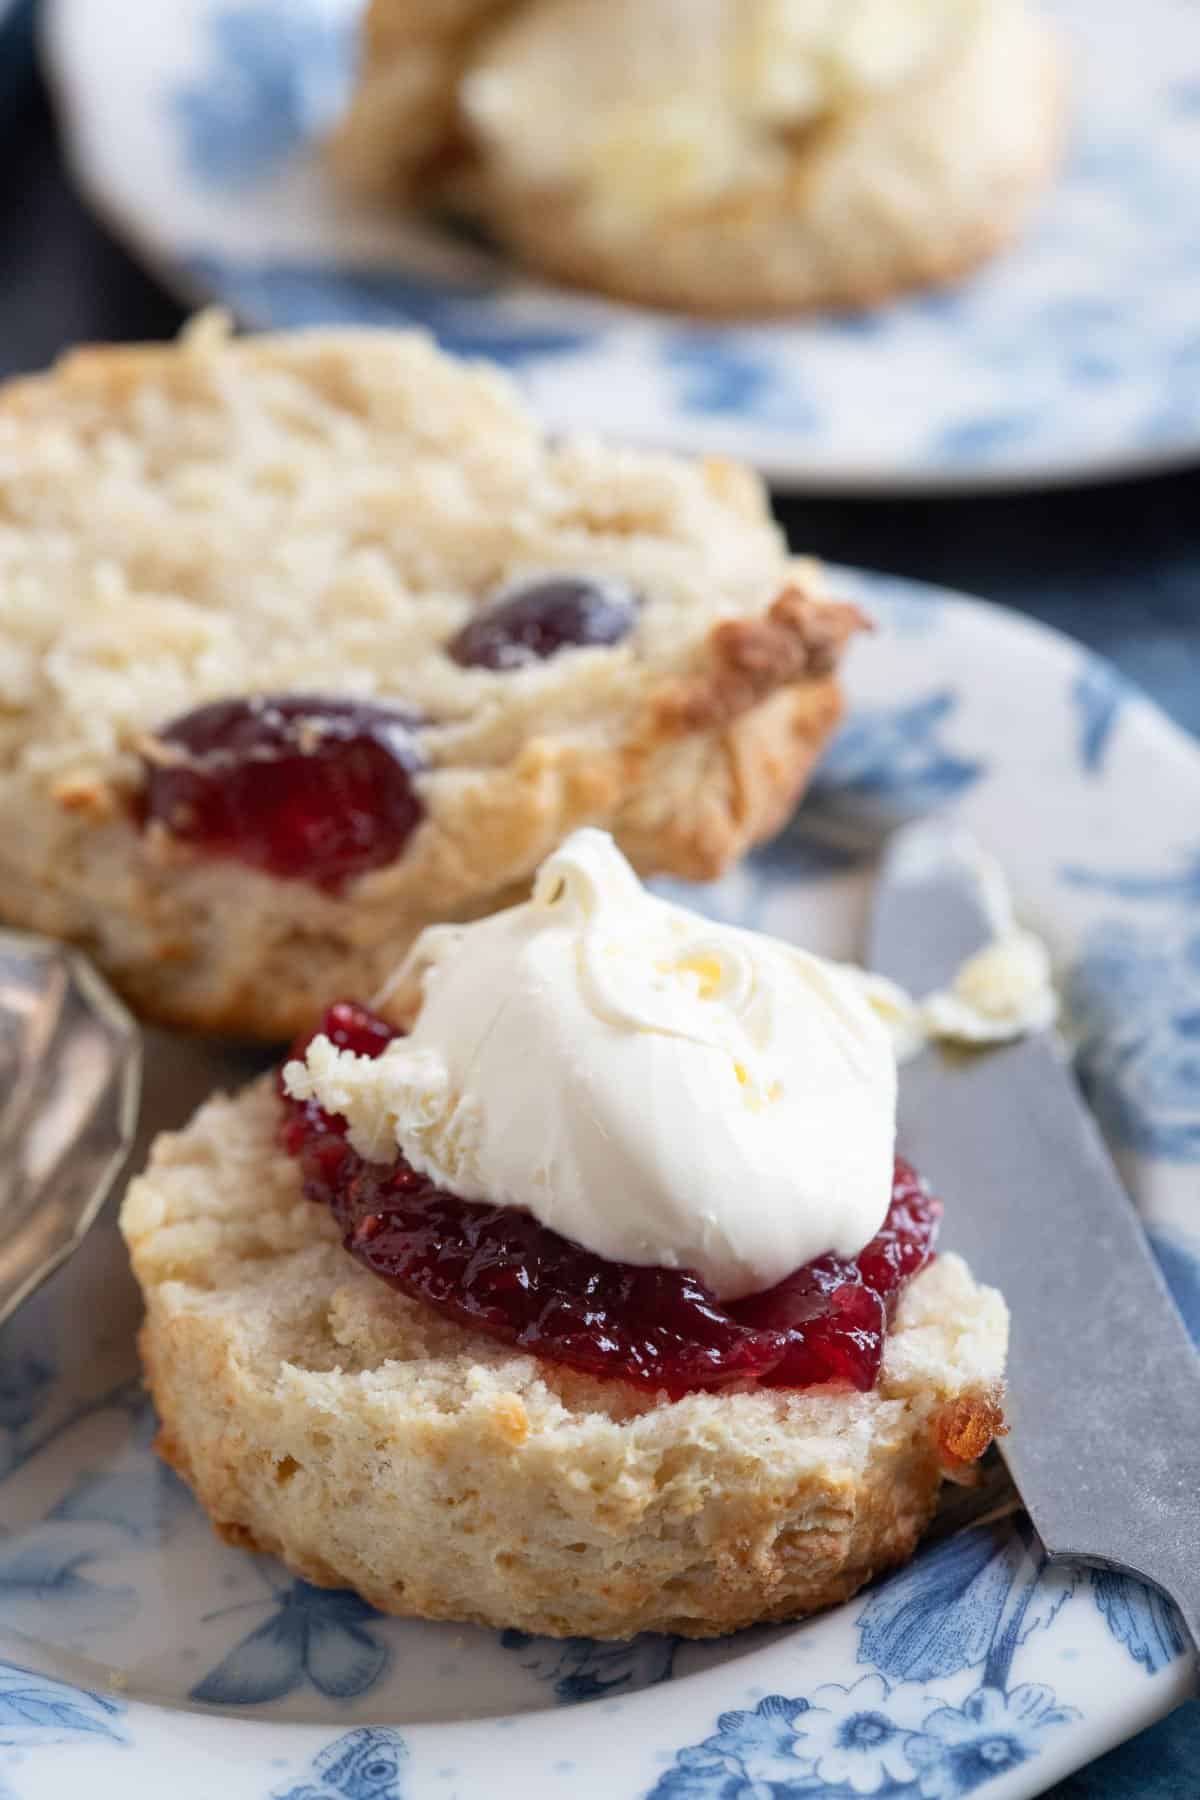 Close-up of a cherry and almond scone served with jam and clotted cream.